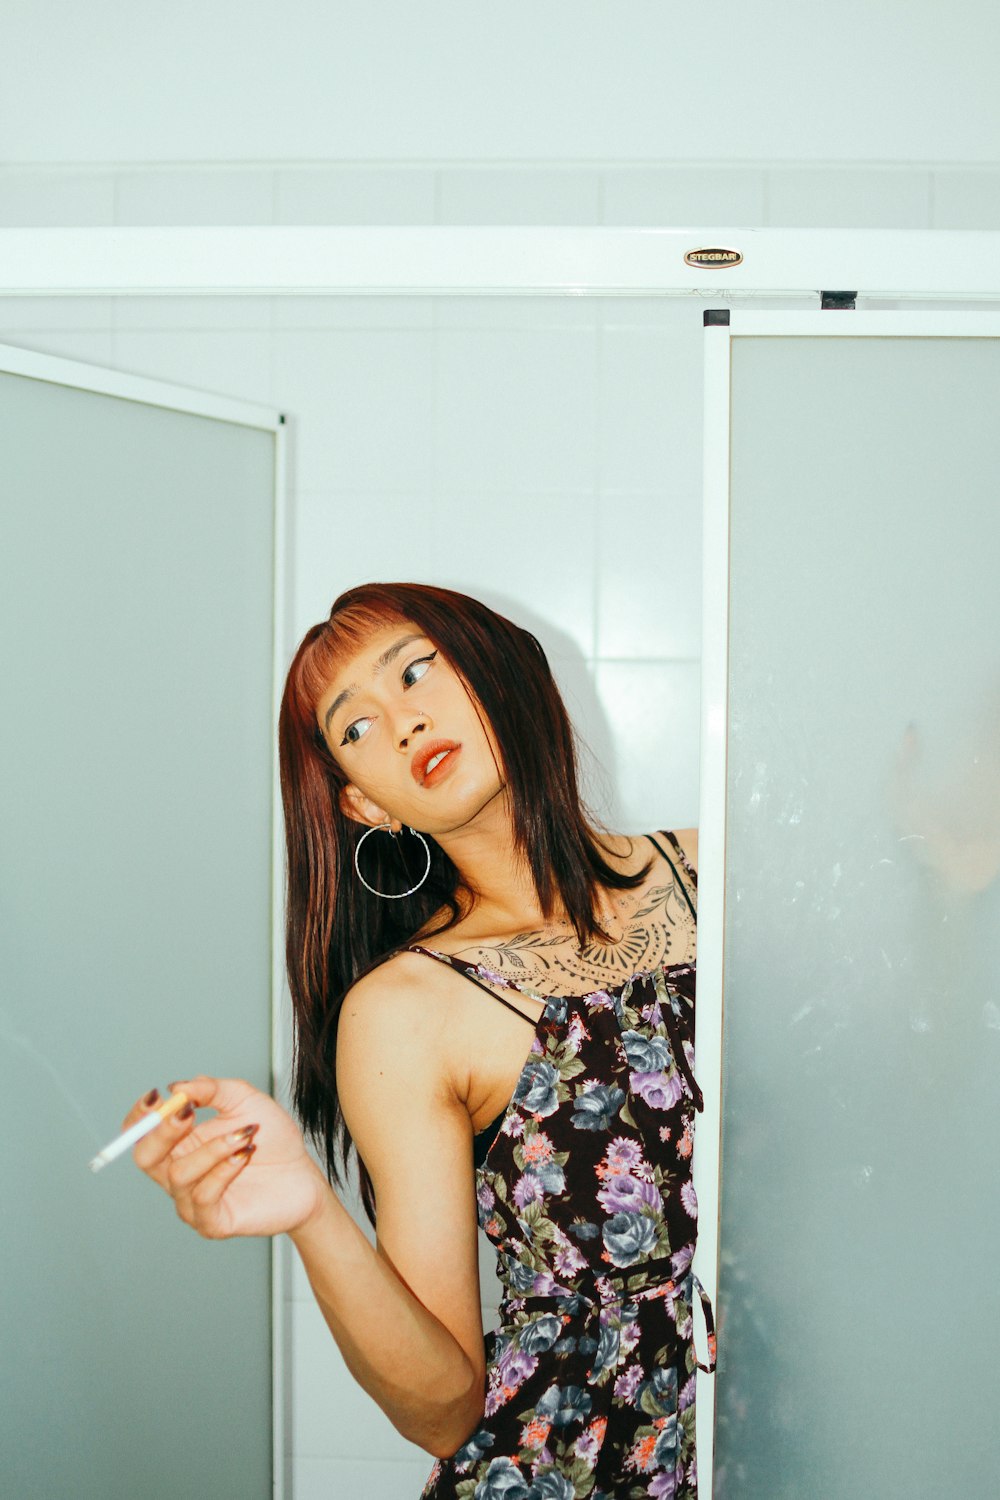 a woman in a floral dress smoking a cigarette